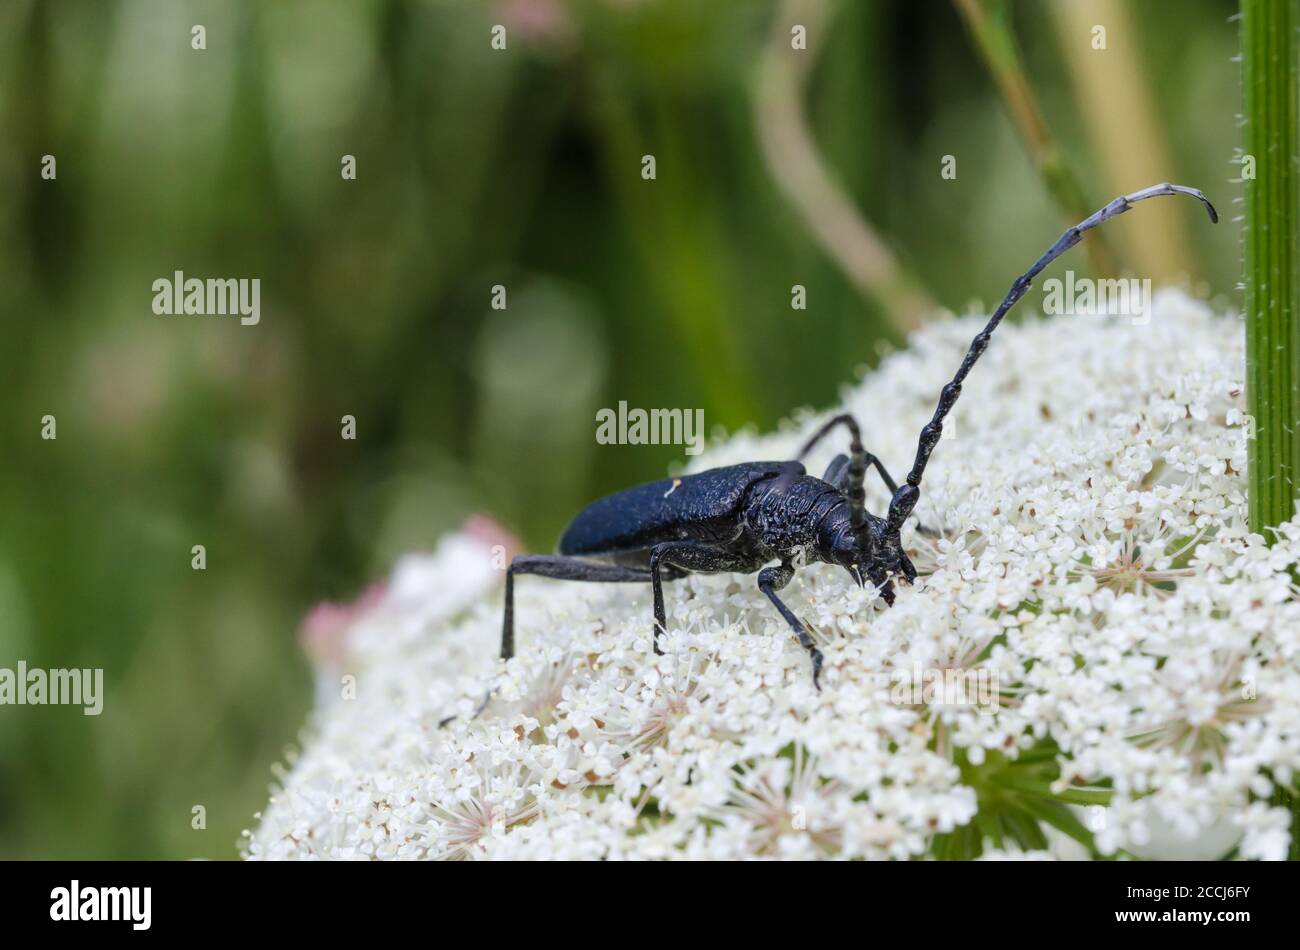 Close up of a Capricorn Beetle on a white flower Stock Photo